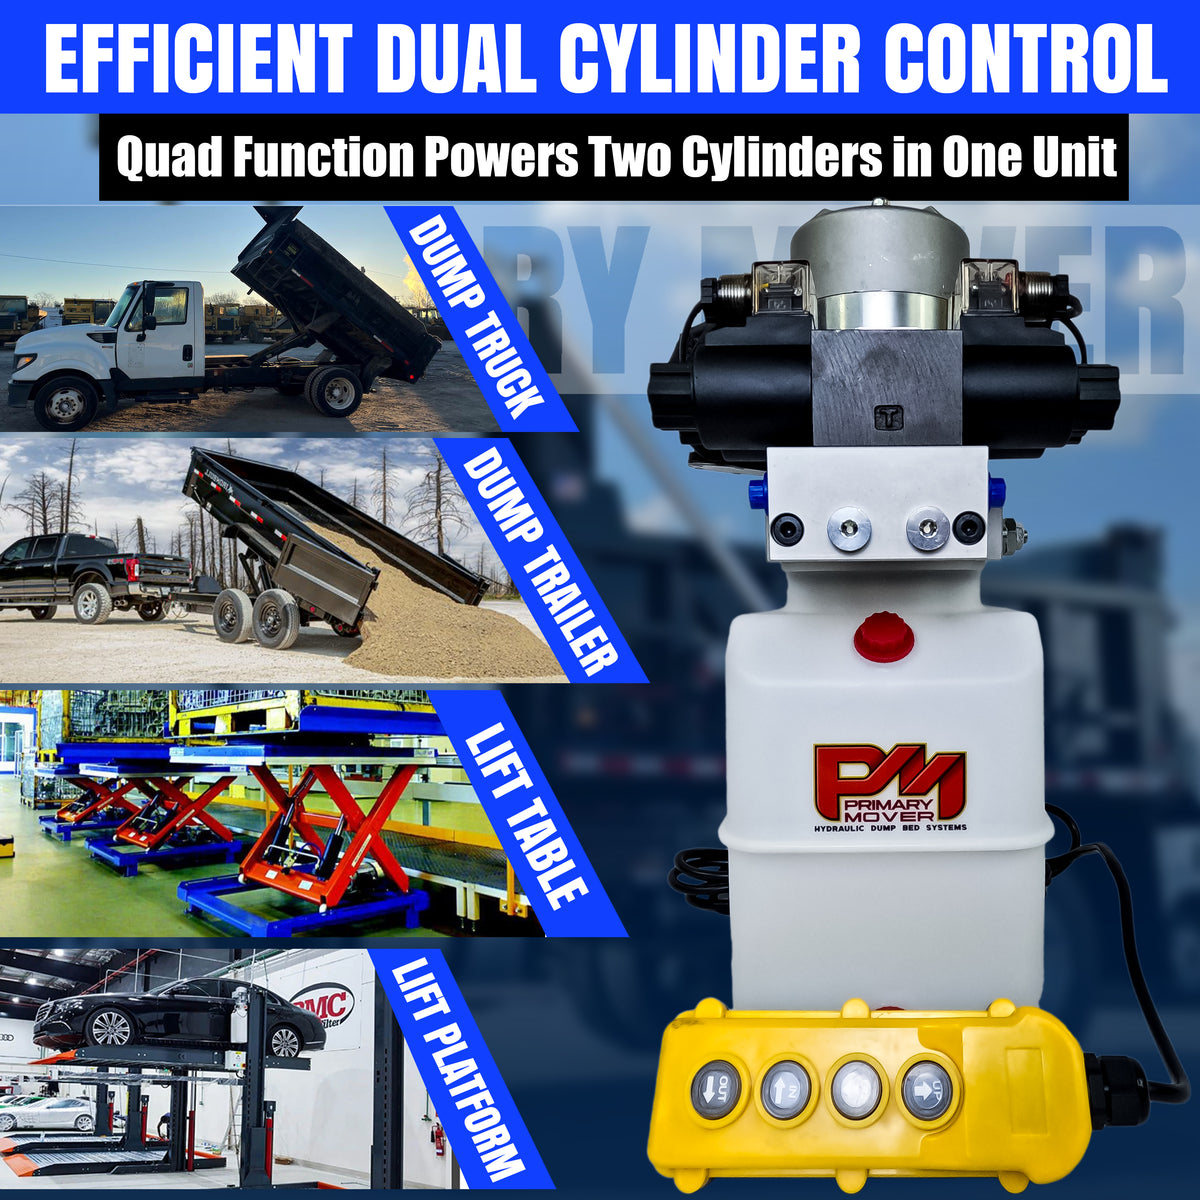 Primary Mover 12V Dual Double-Acting Hydraulic Power Unit for dump trailers and trucks, enabling four hydraulic actions simultaneously. Compact, high-performance, and user-friendly for versatile applications.